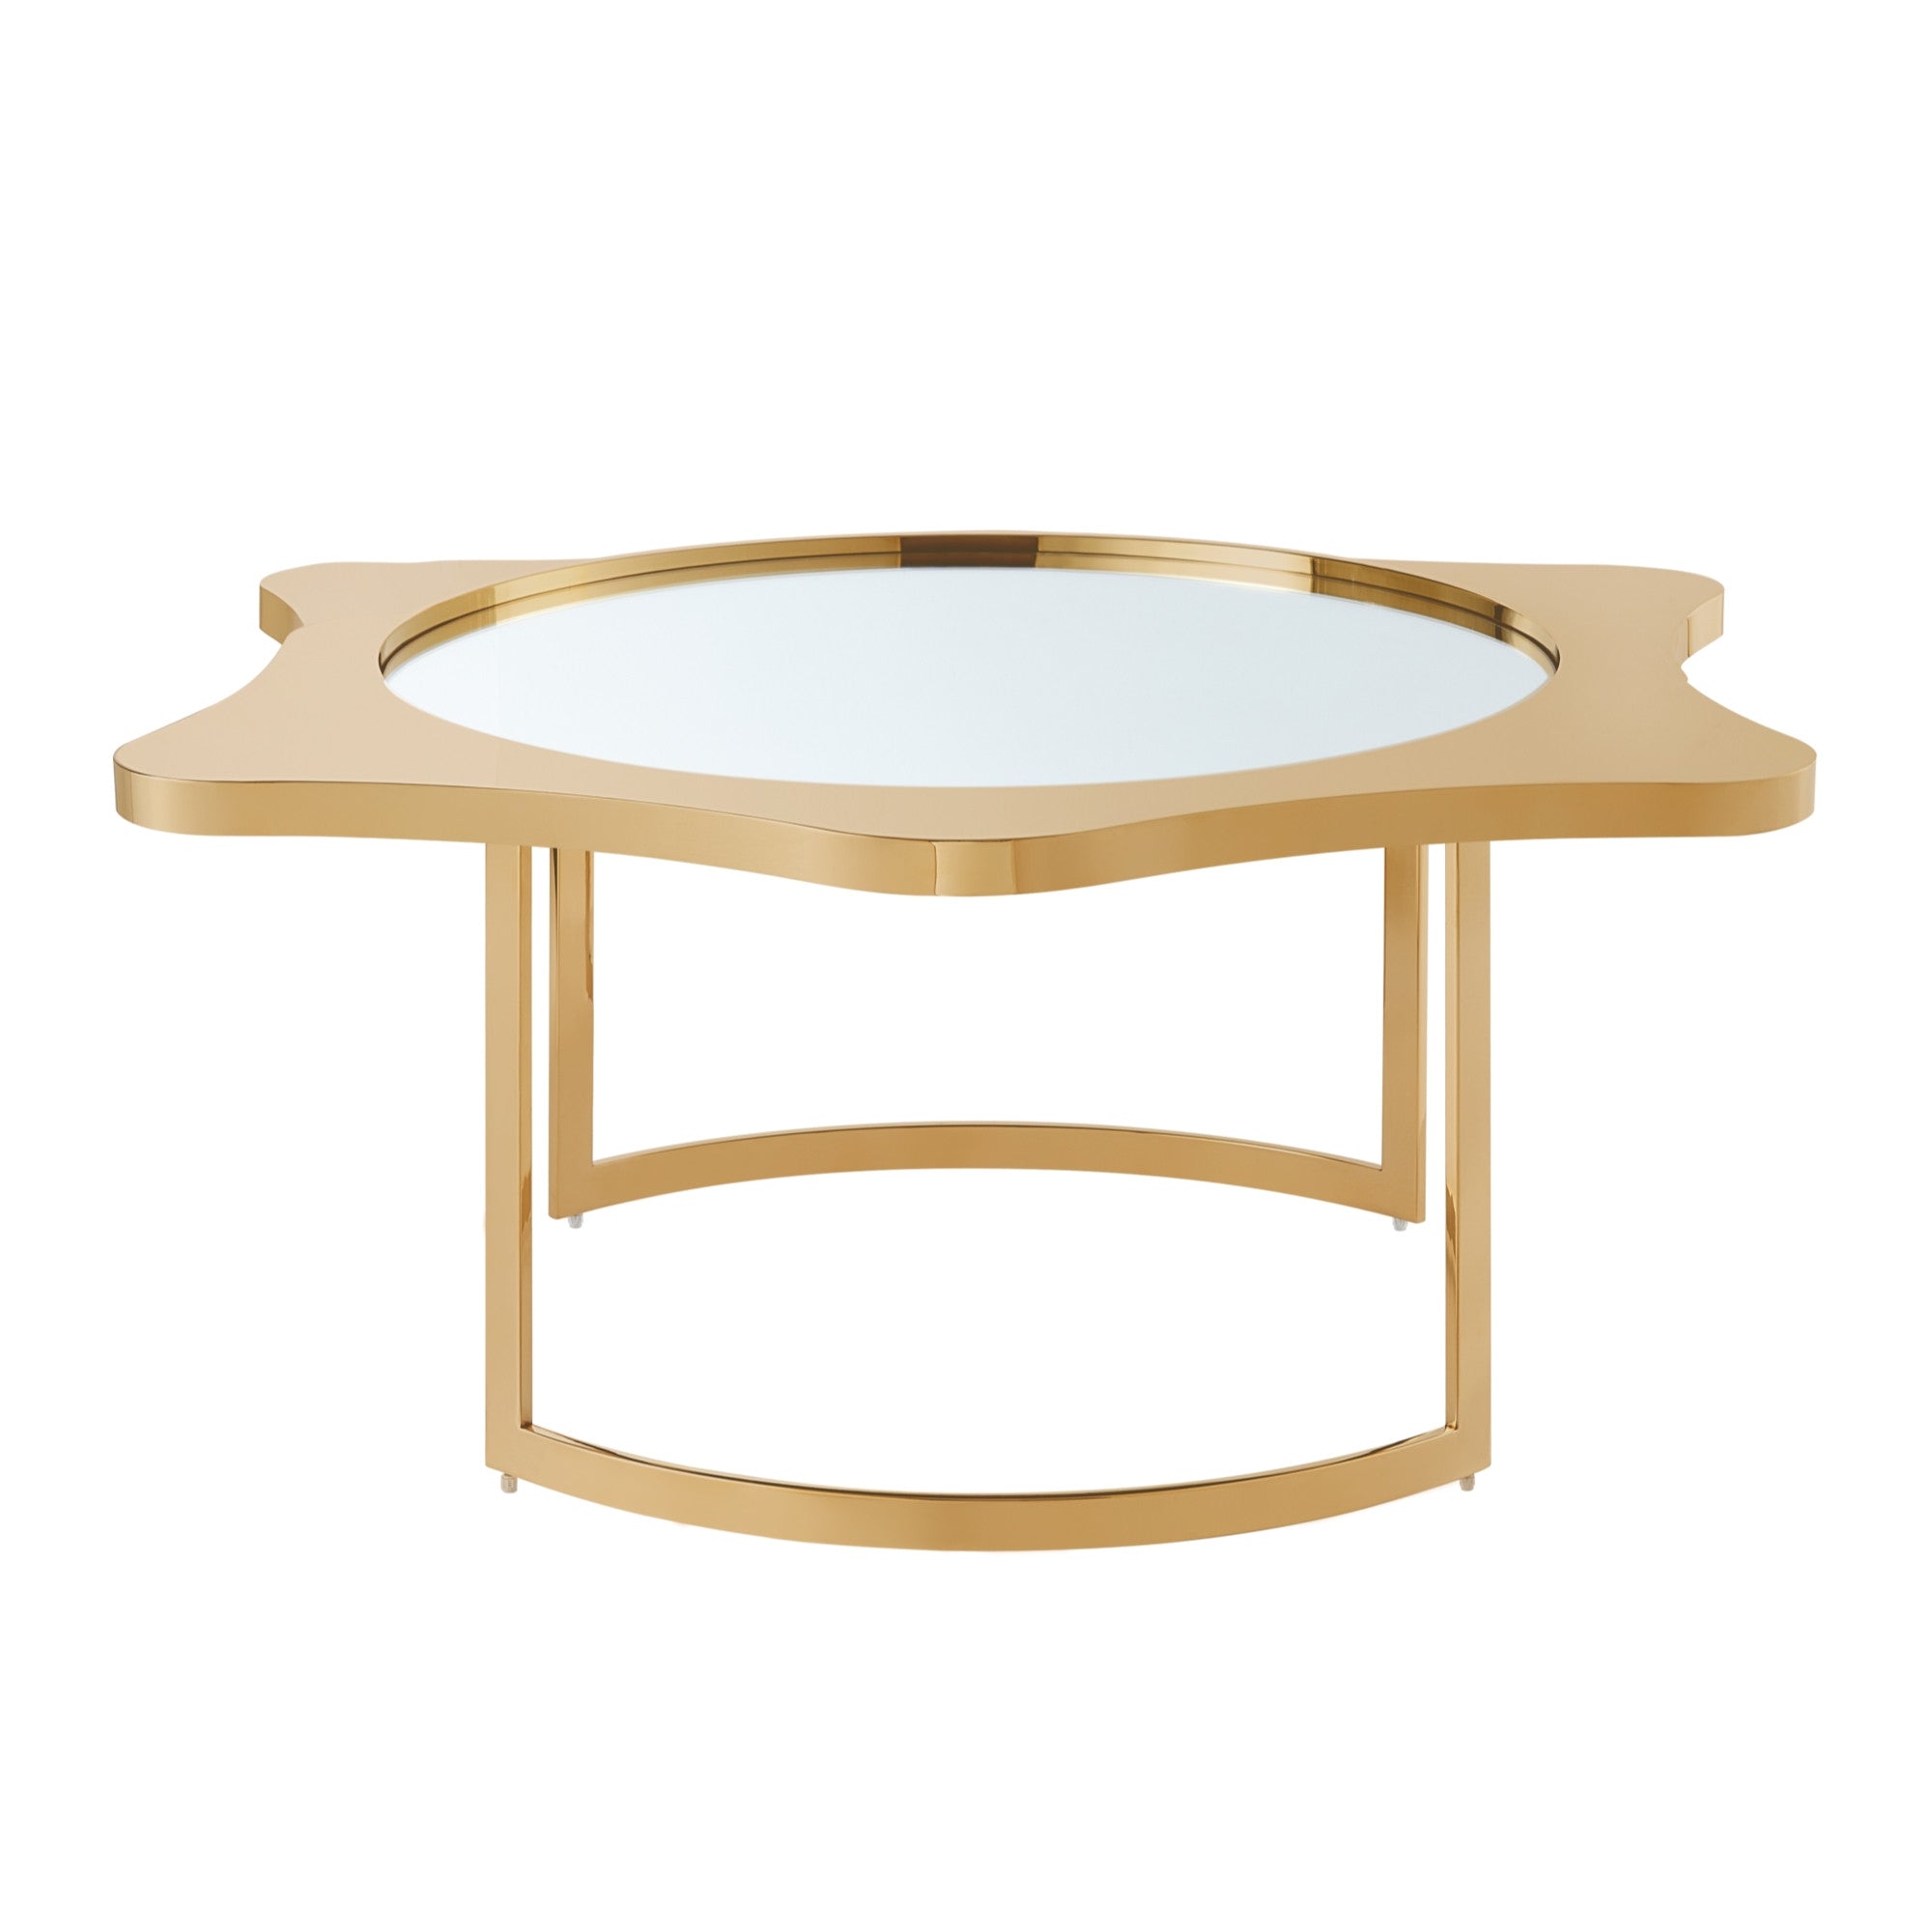 32" Gold Glass And Stainless Steel Round Mirrored Coffee Table